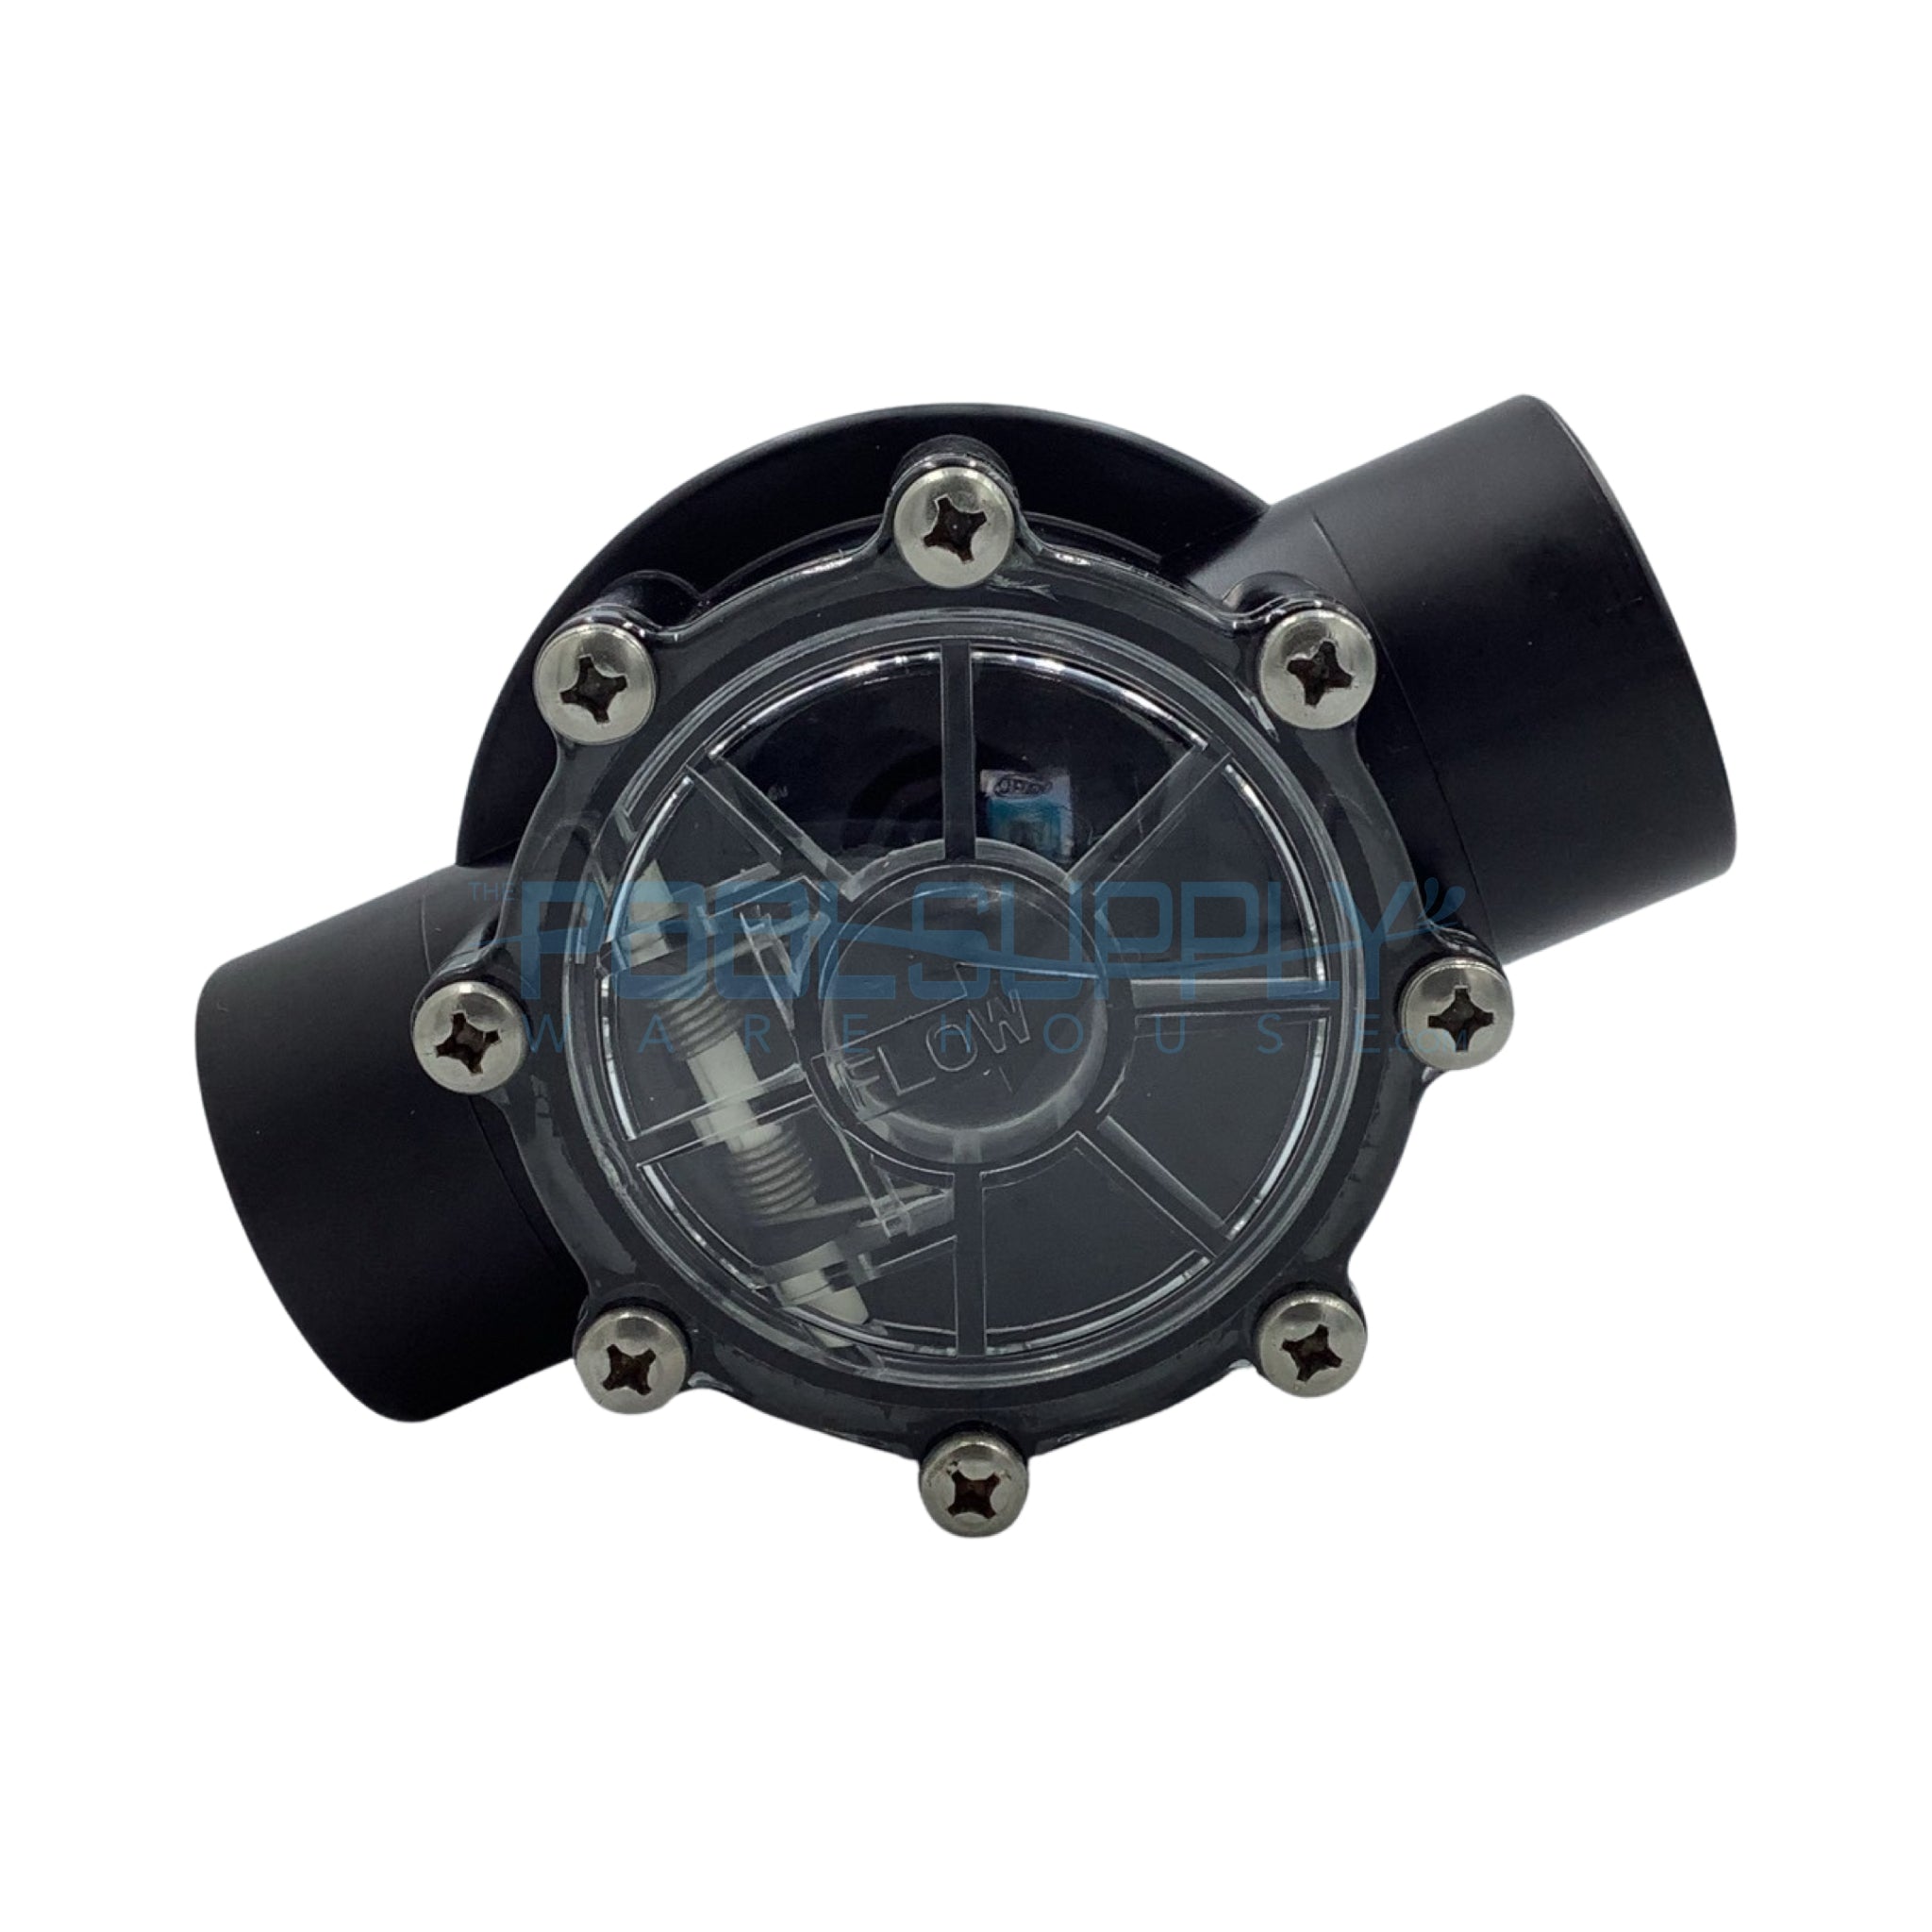 CMP Hydroseal Black CPVC Serviceable Check Valve - 25830-714-000 - The Pool Supply Warehouse